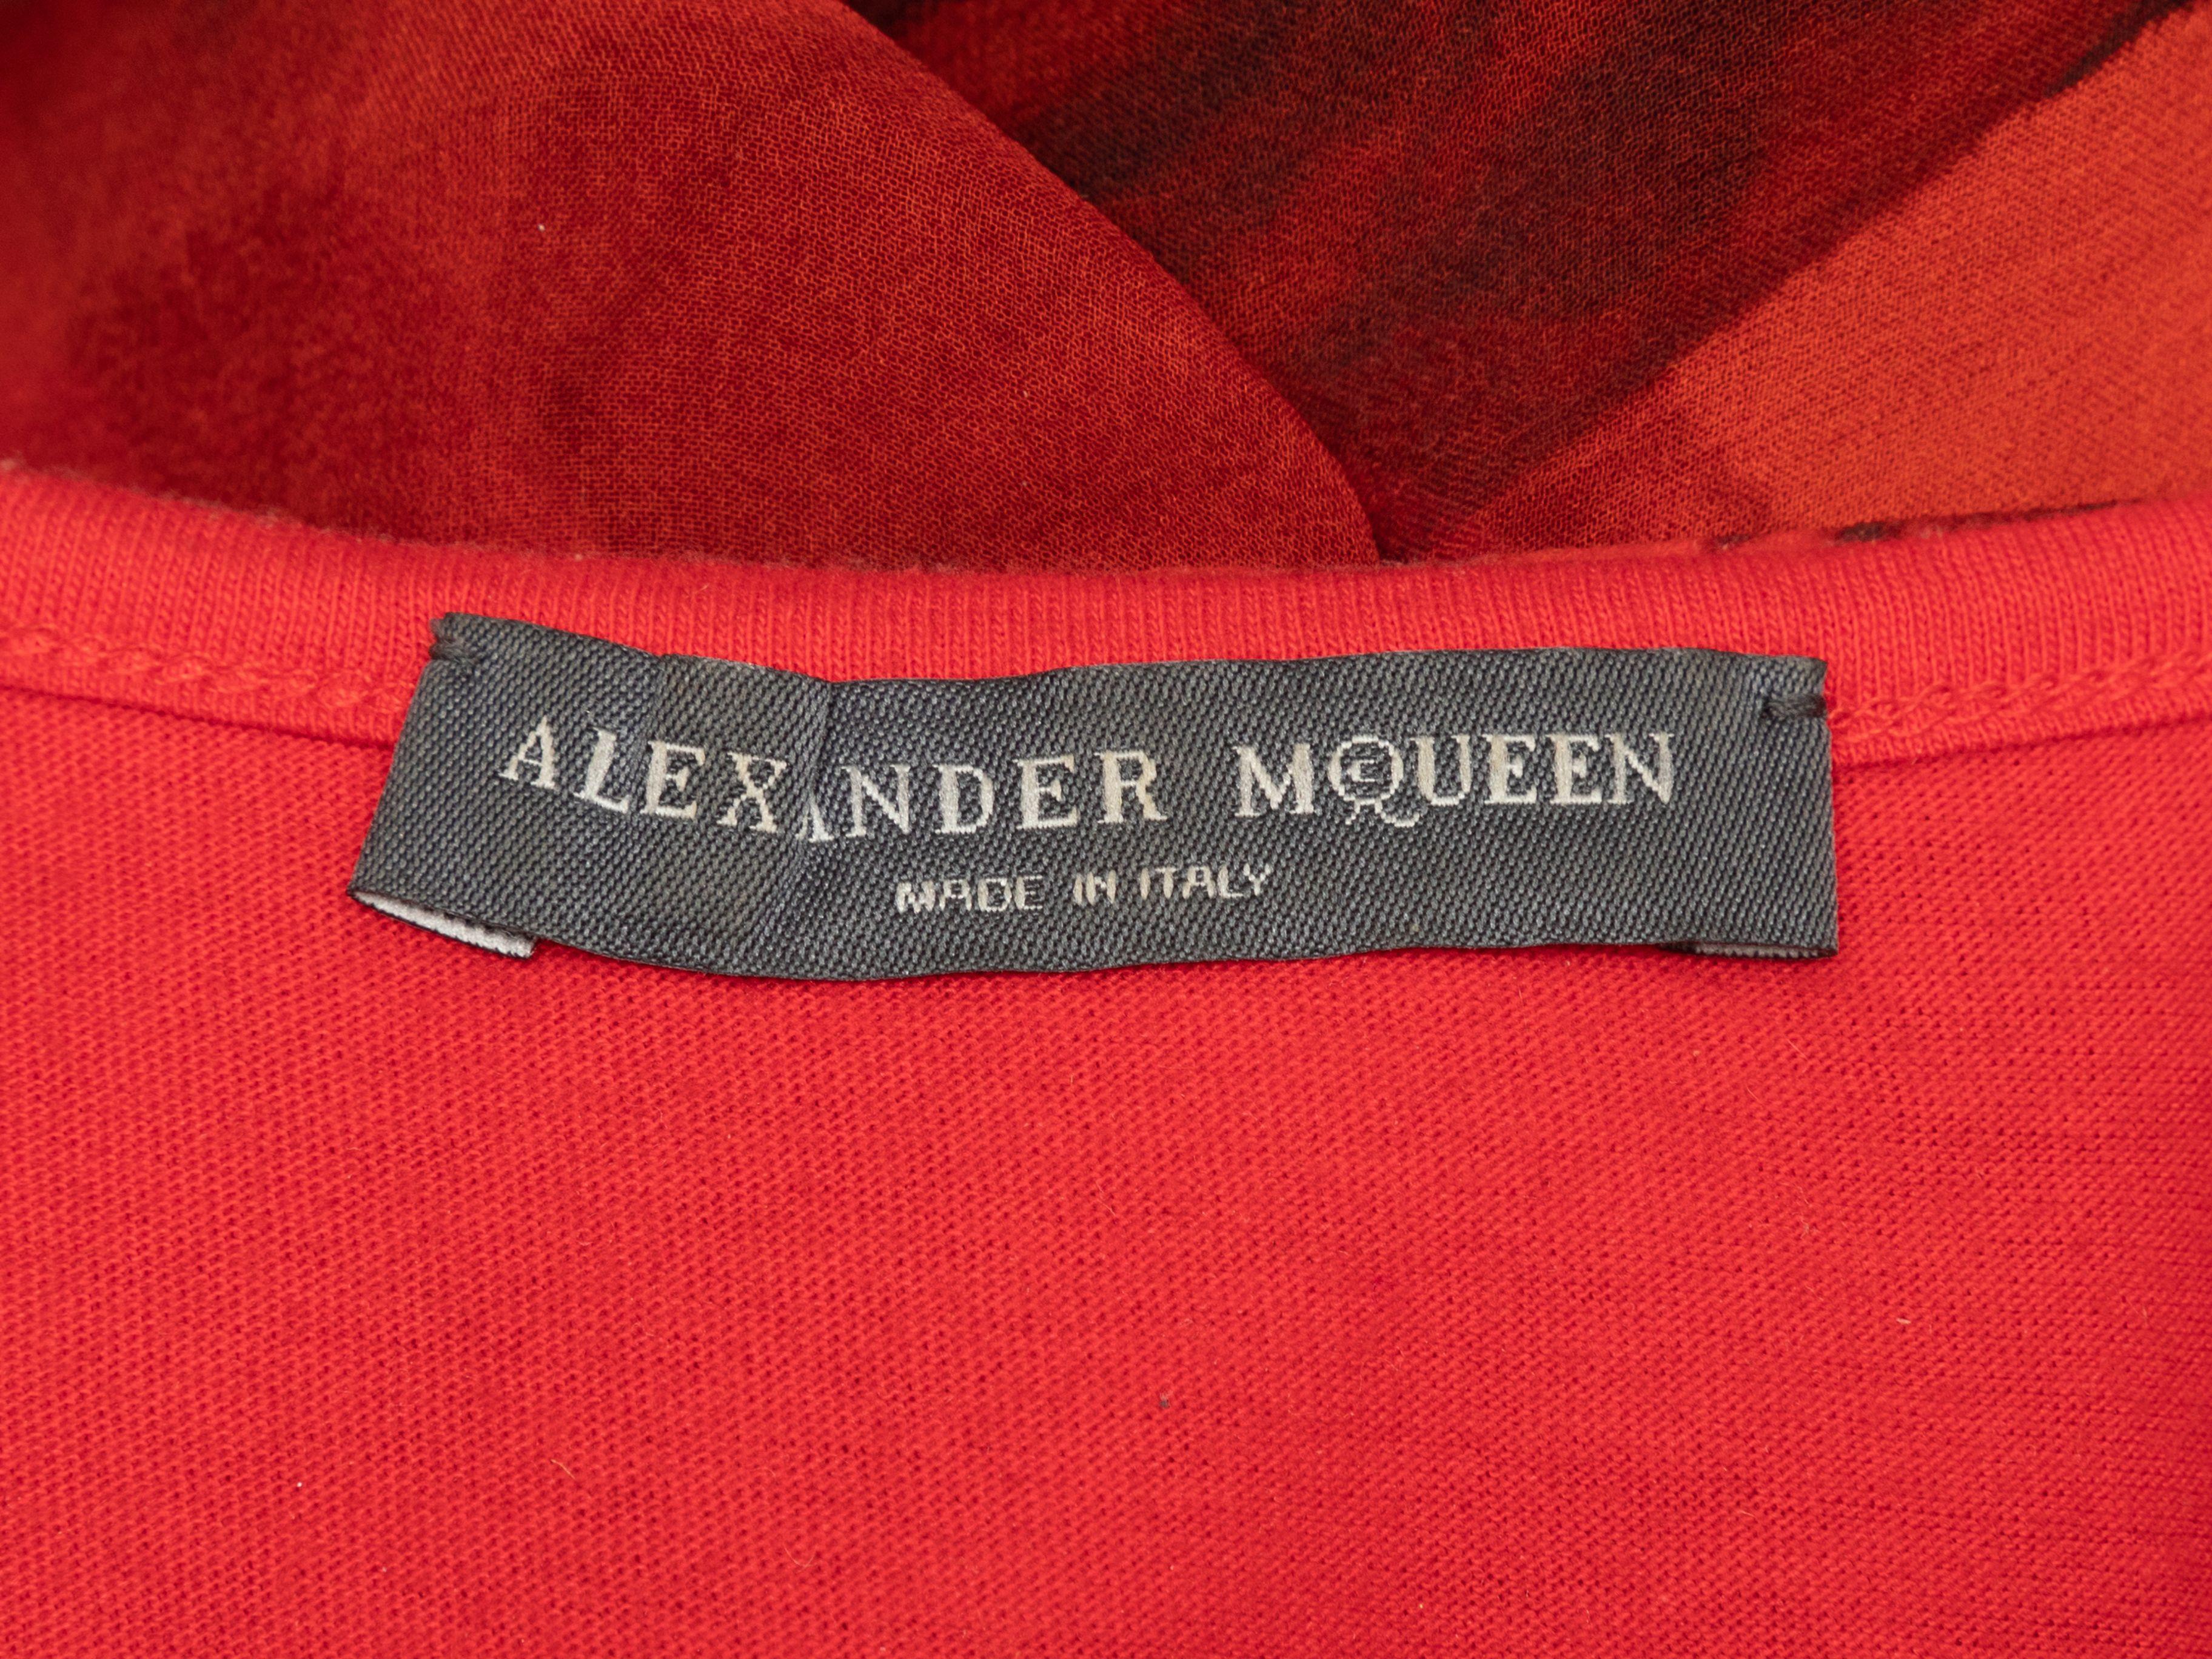 Product Details: Red and black silk floral print top by Alexander McQueen. Crew neck. Short dolman sleeves. 30